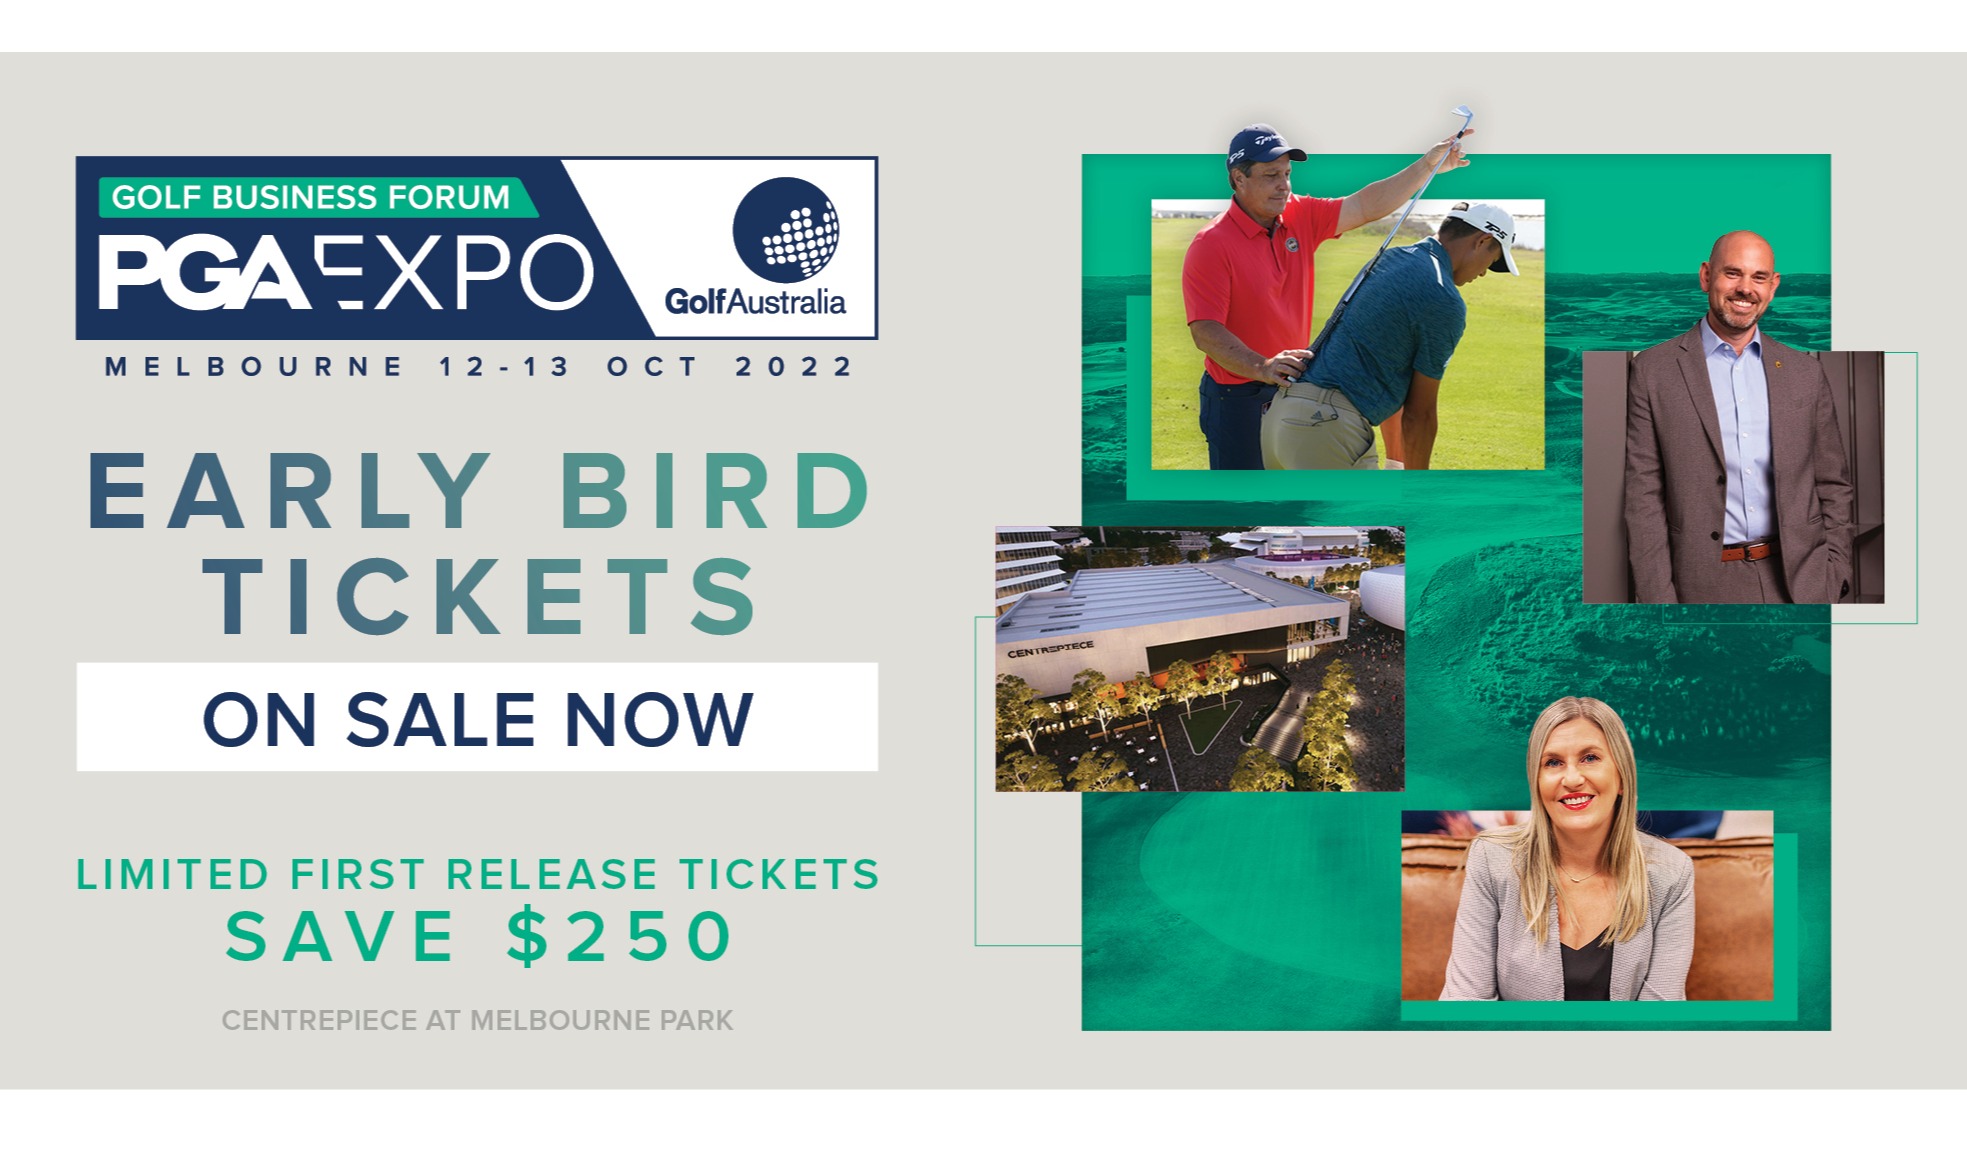 Tickets on sale for golf's groundbreaking business event Golf Australia